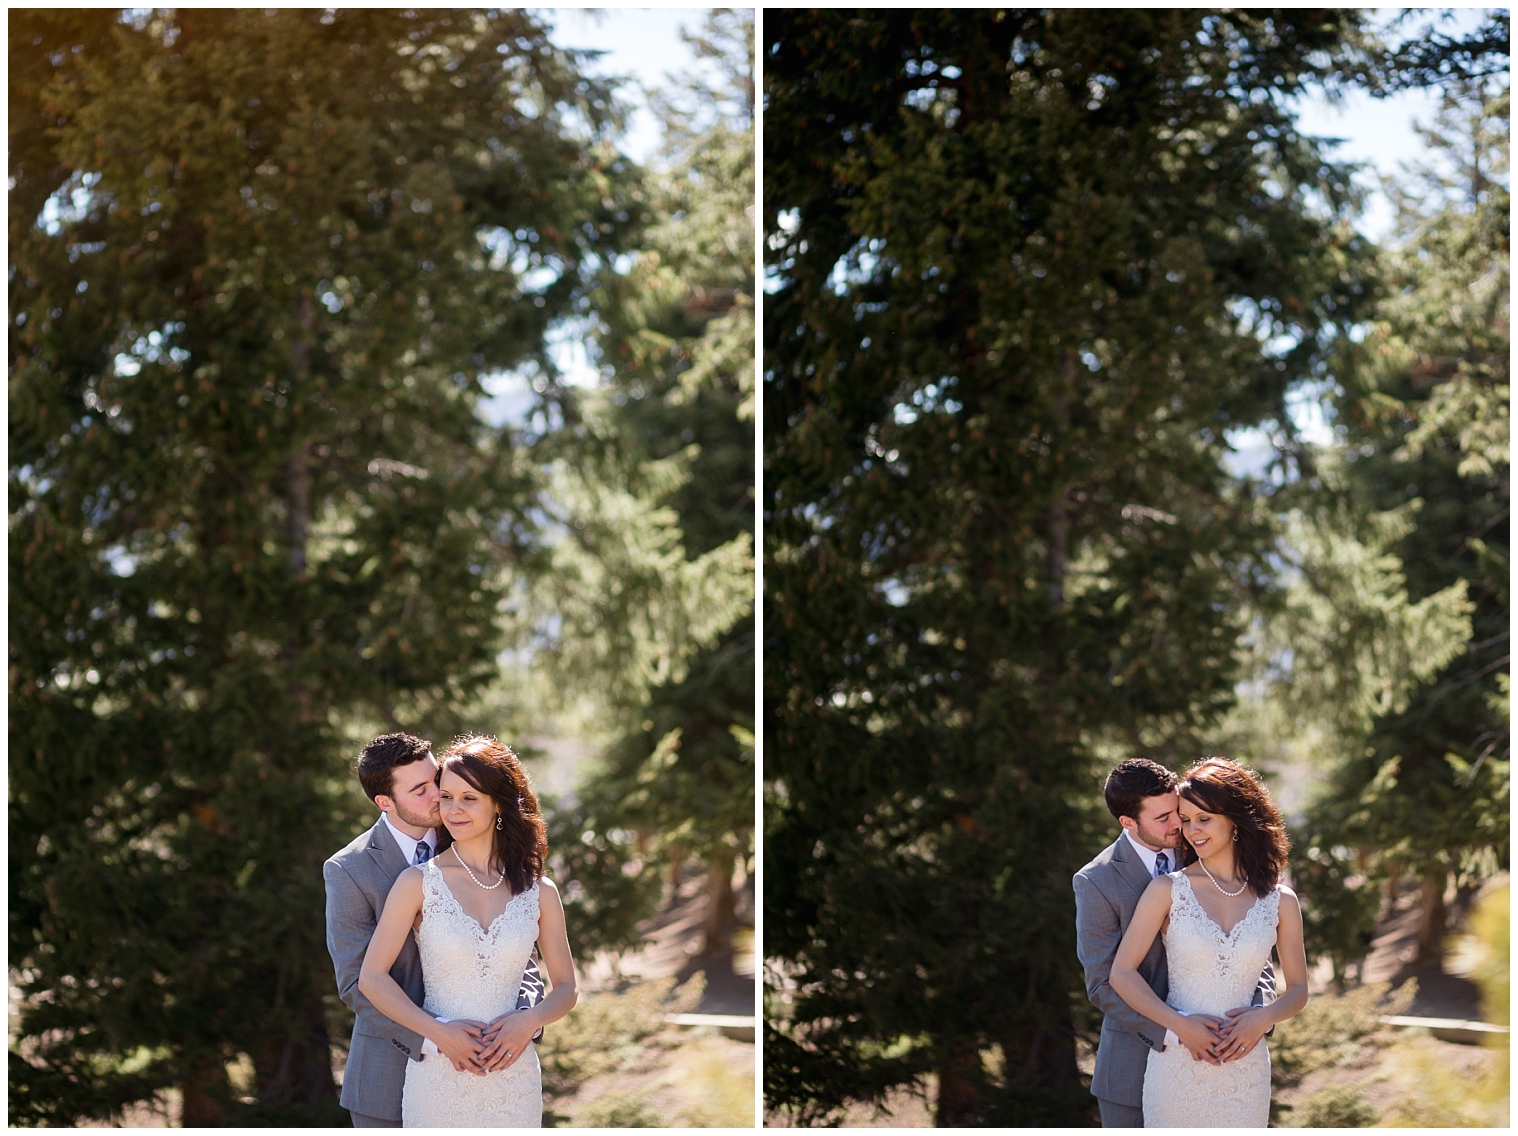 Groom holds his brides during portraits with a Breckenridge elopement photographer.